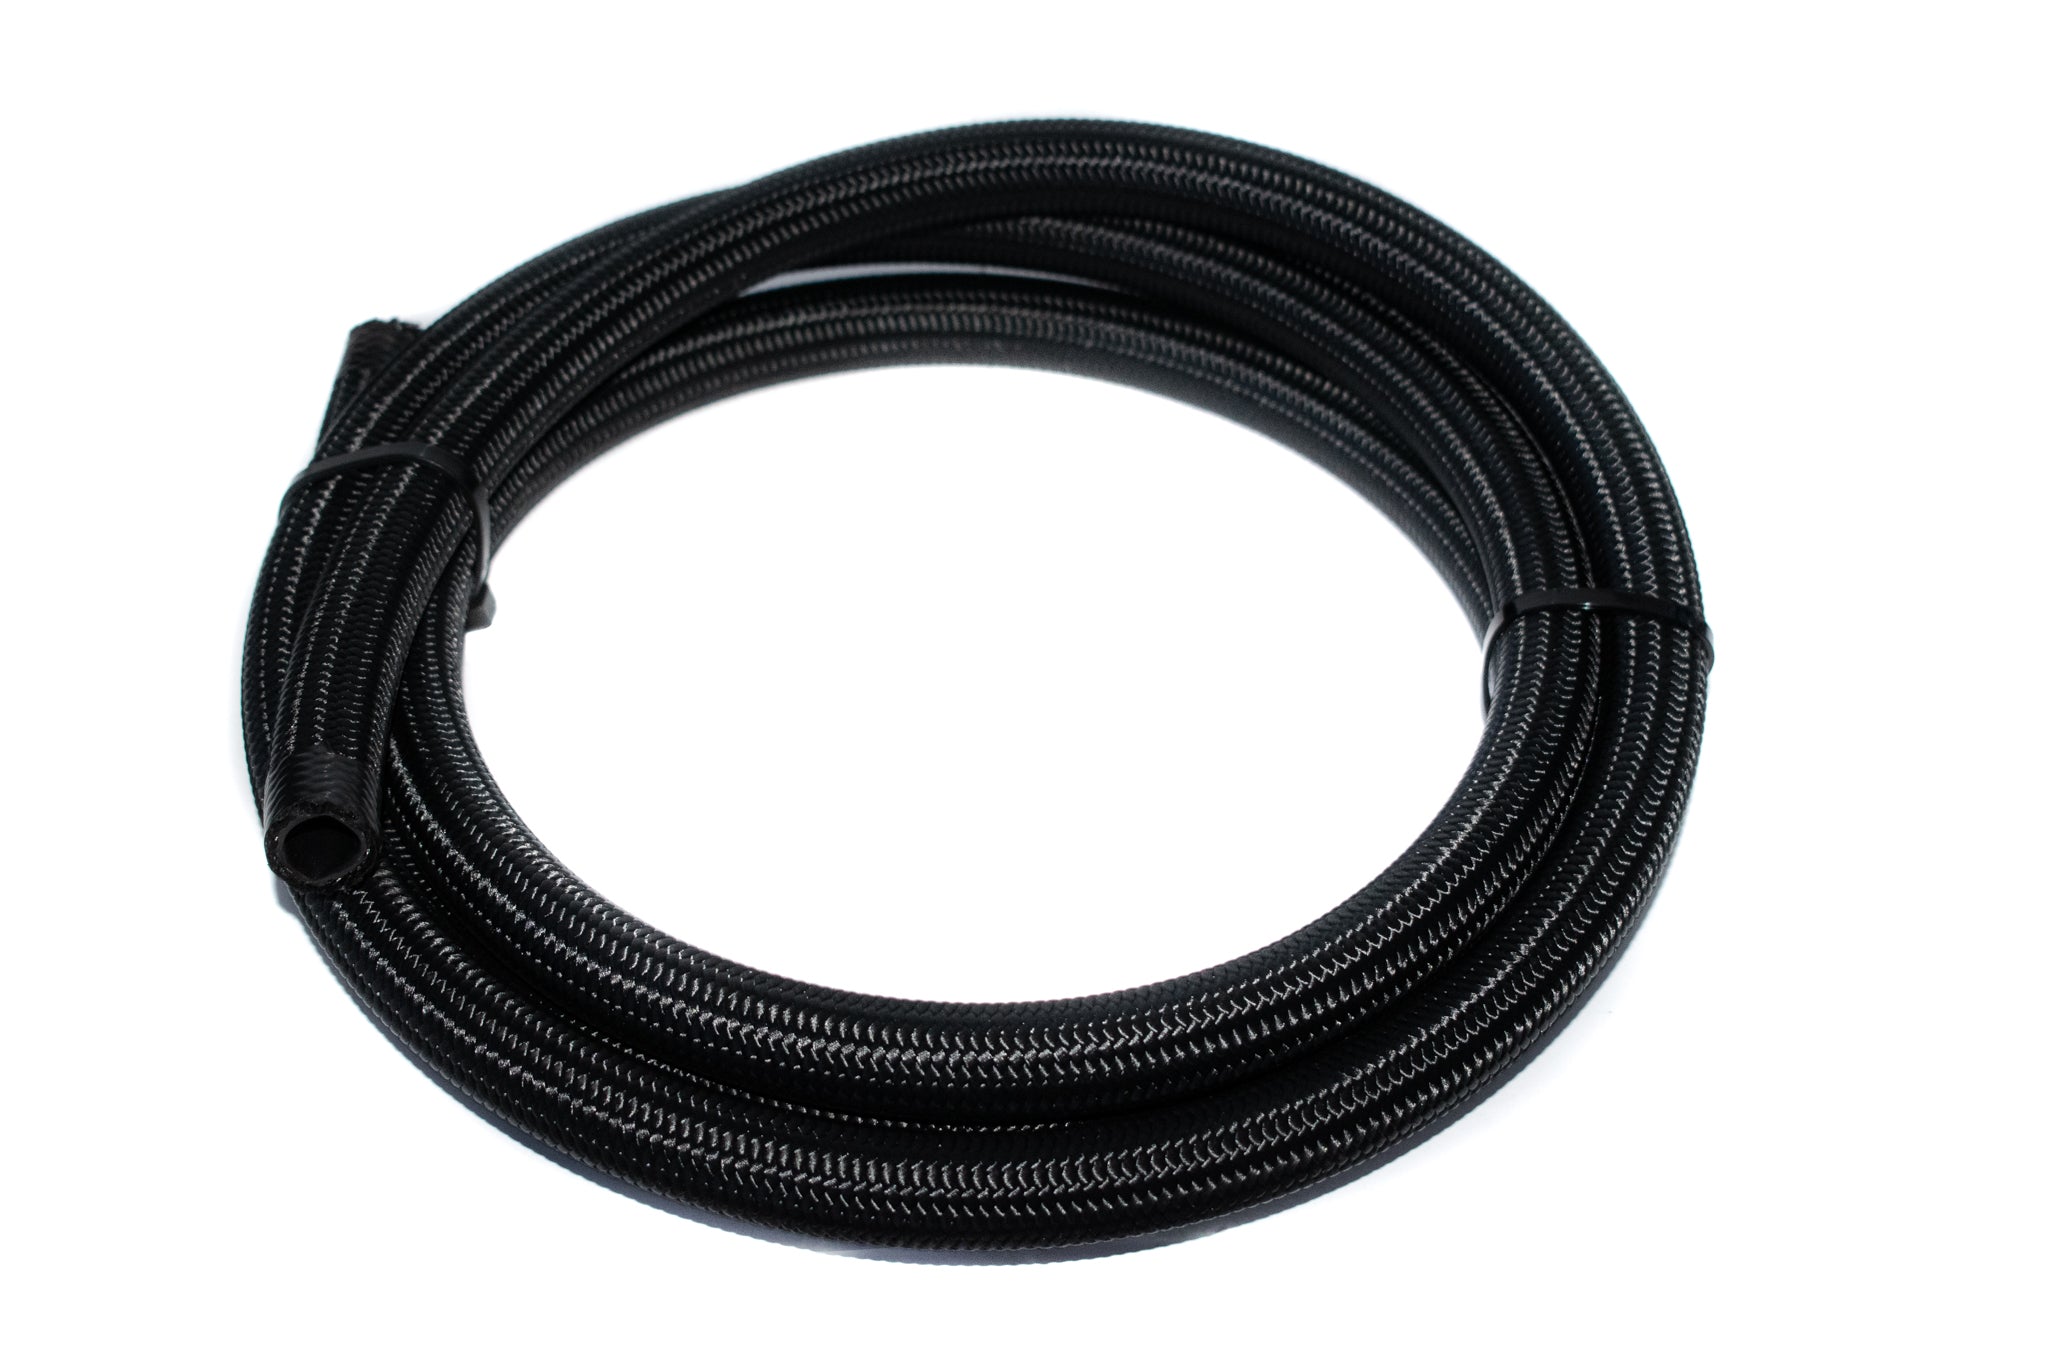 AN10 1/2" Flexible Fuel / Oil Tube with Braided Coating - 1 meter - RTMG Performance